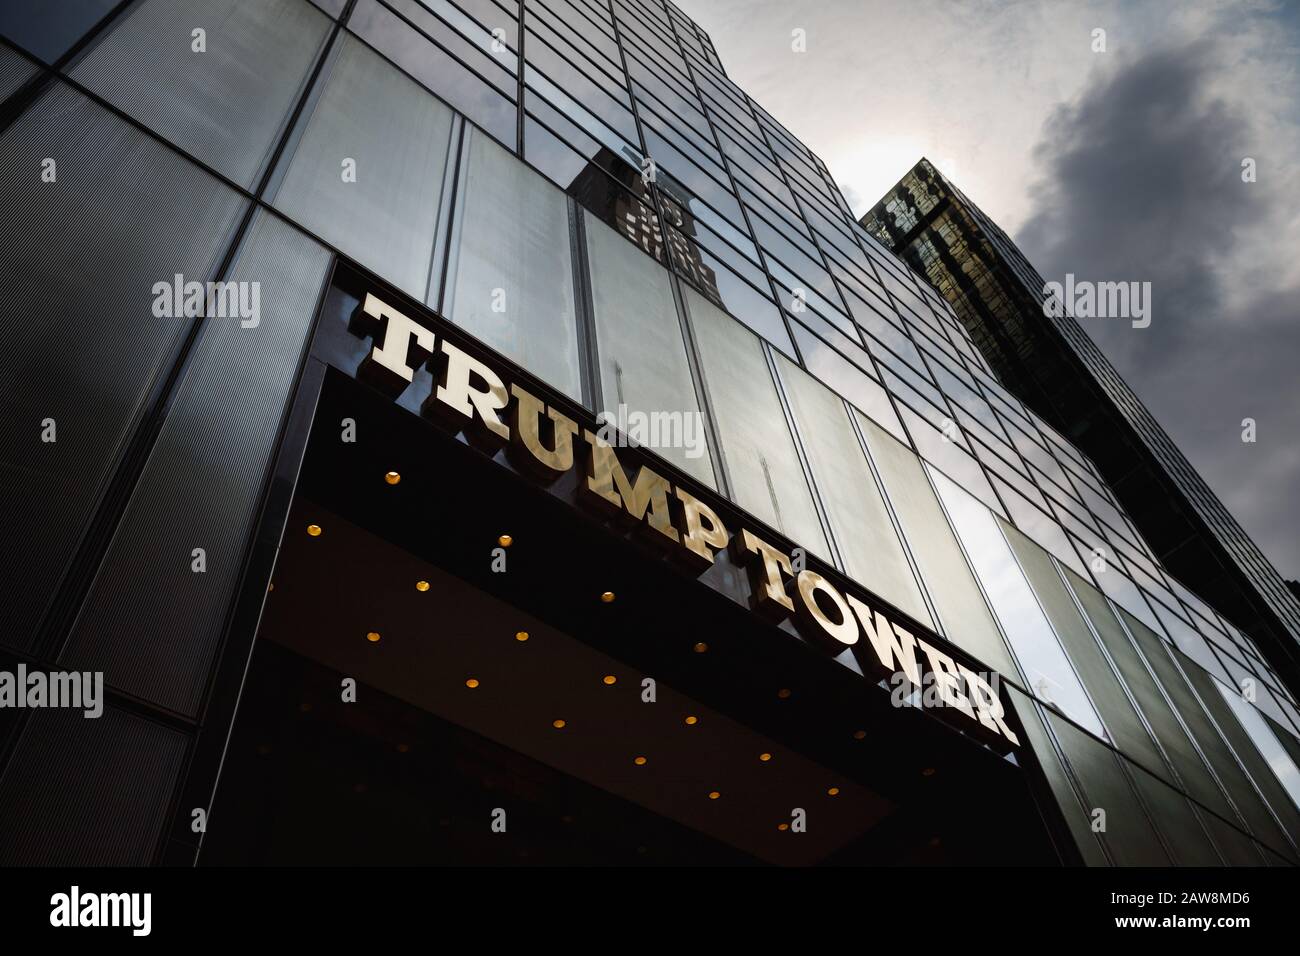 Trump tower entrance in New York City, luxury hotel lobby and  building with gold letters Stock Photo